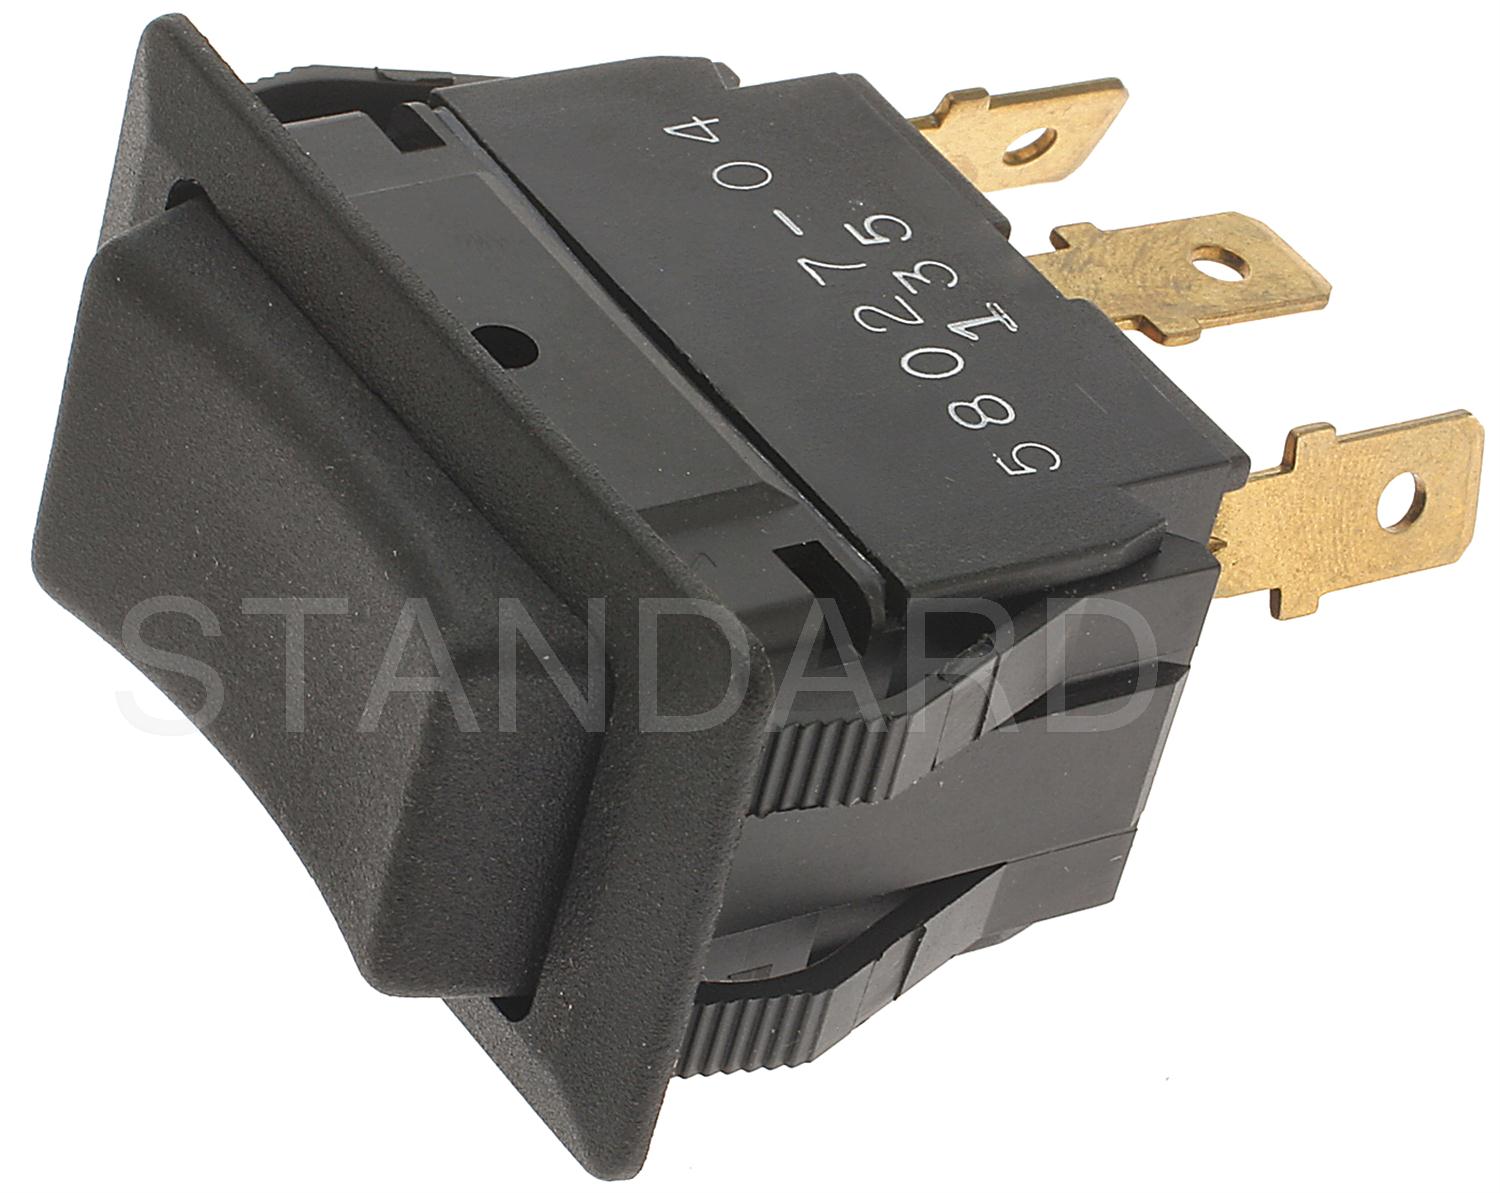 Show details for Standard Motor Products DS516 Multi Purpose Switch